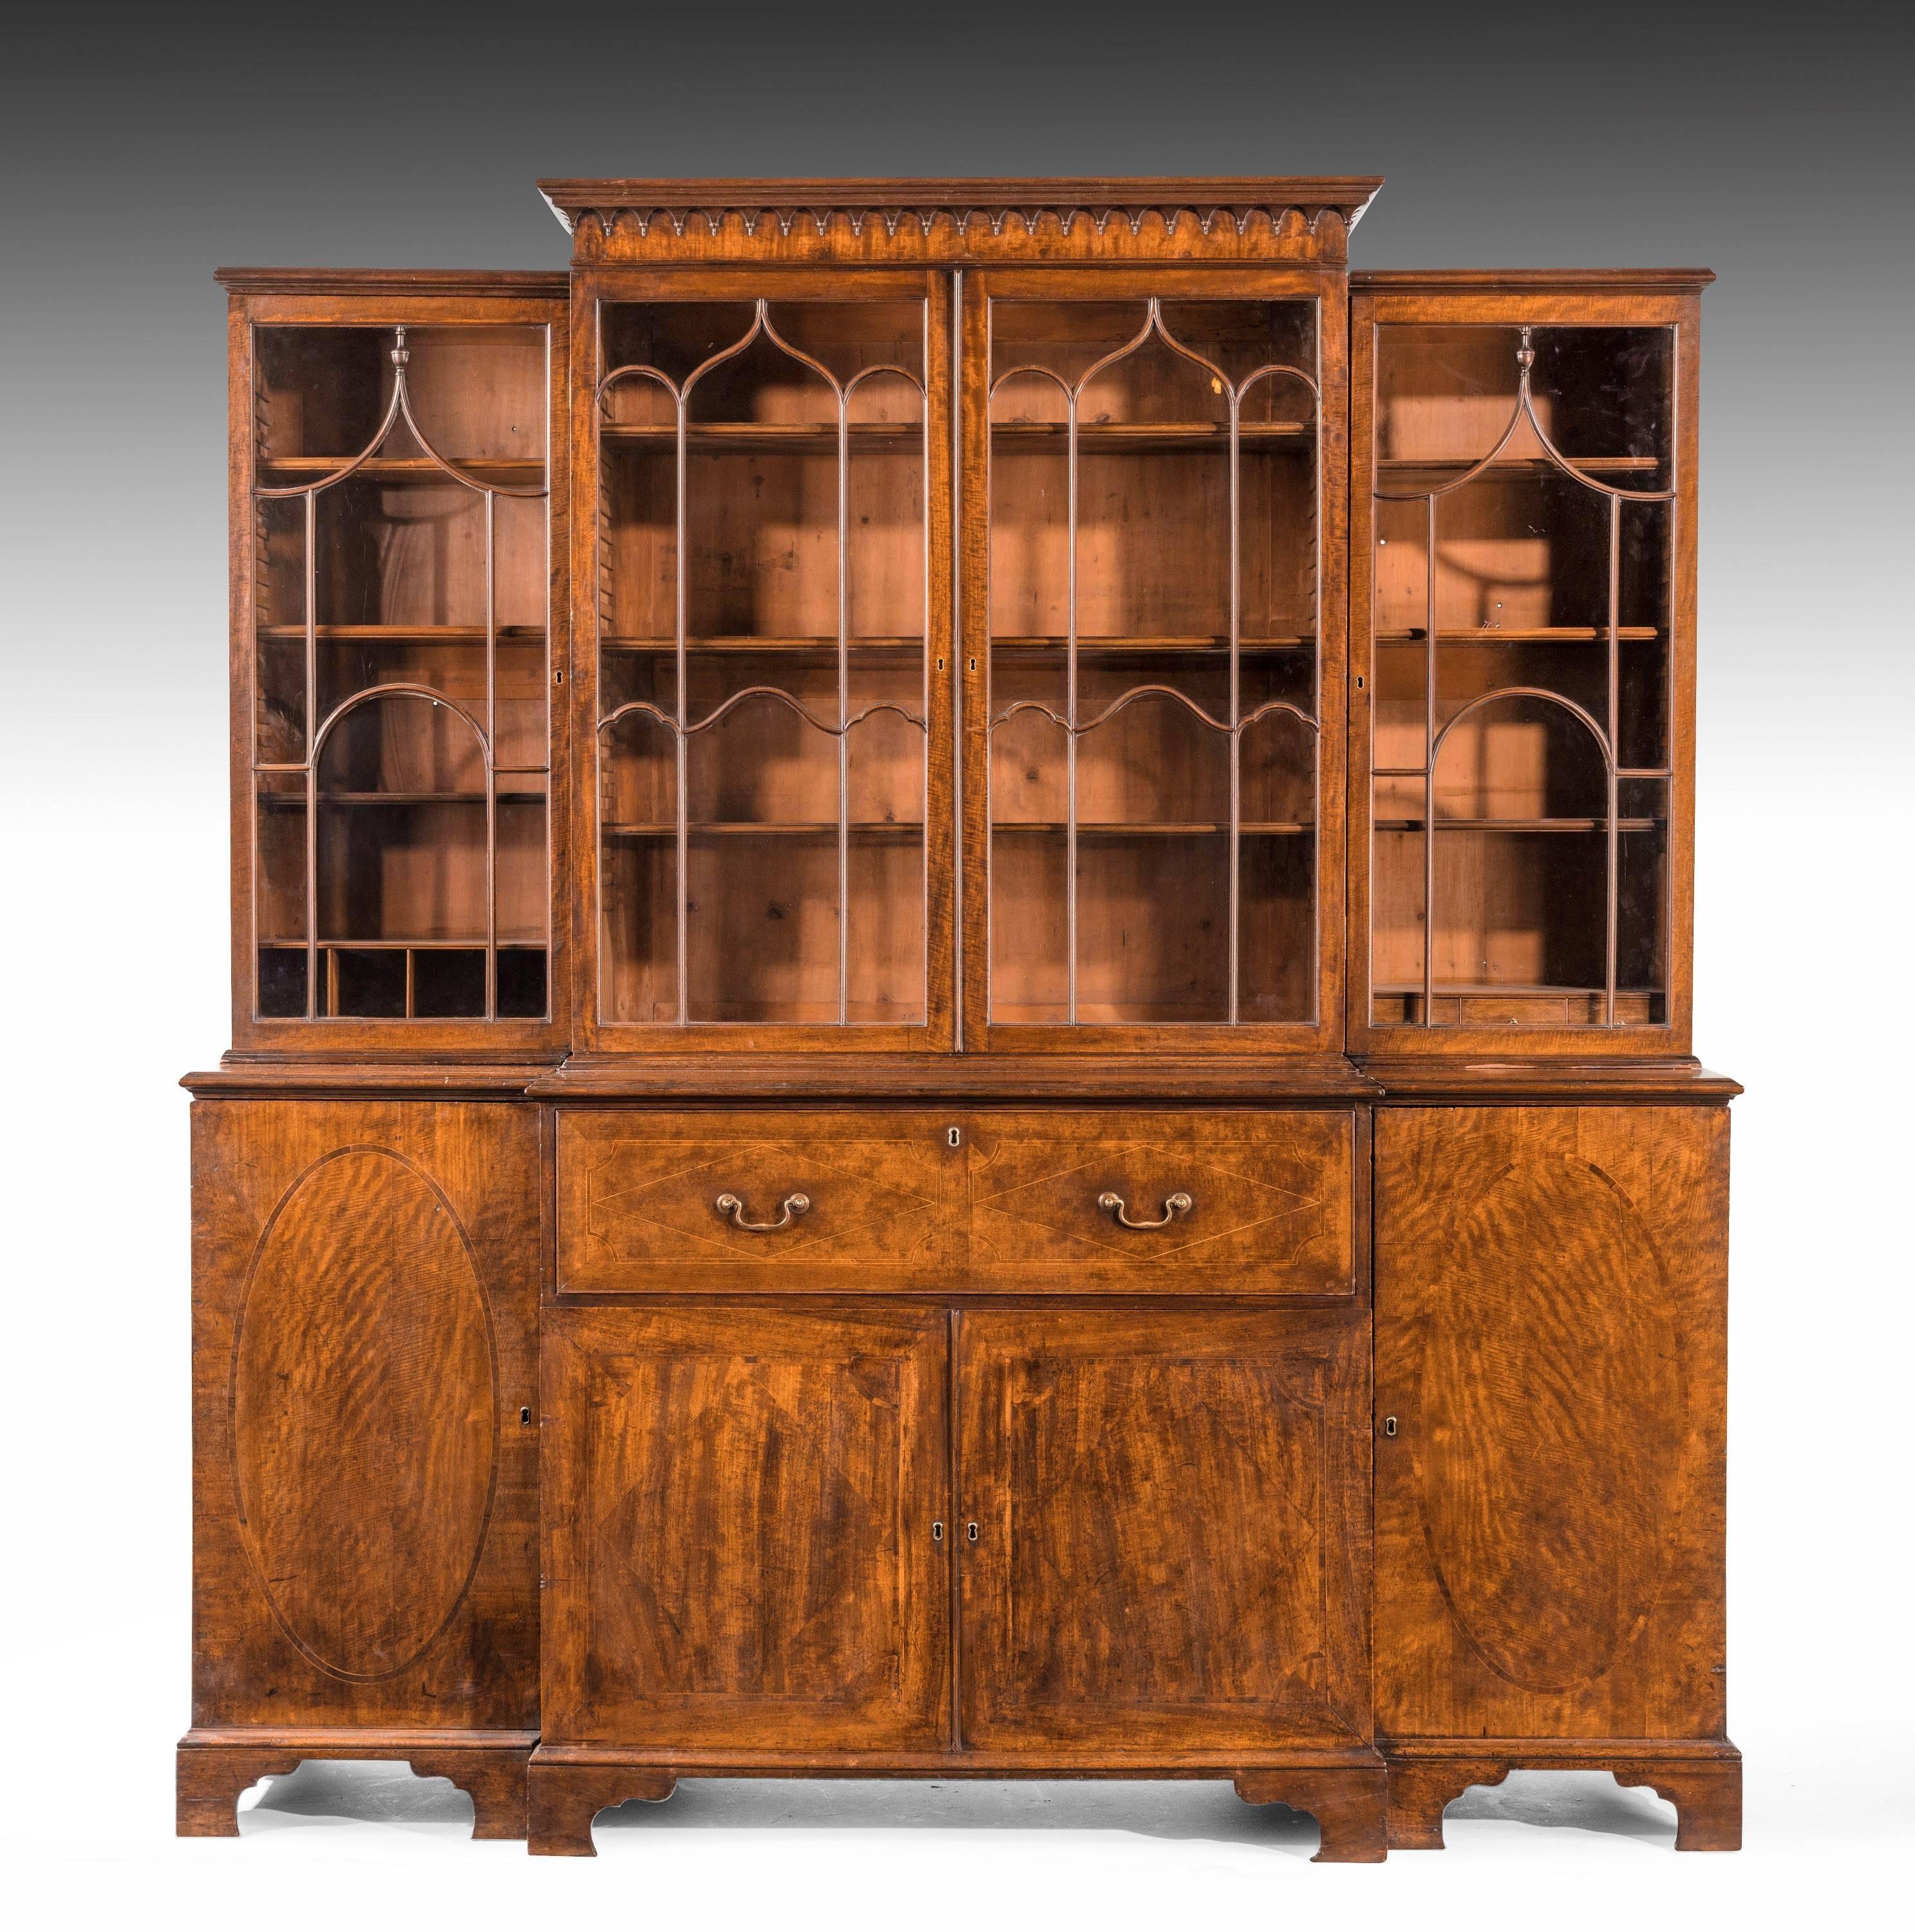 A handsome George III period mahogany breakfront bookcase. The outer doors with contrasting oval panels within quartered frames. The top with a finely carved dentil cornice. Original period bracket feet. Well fitted interior with drawers and pigeon